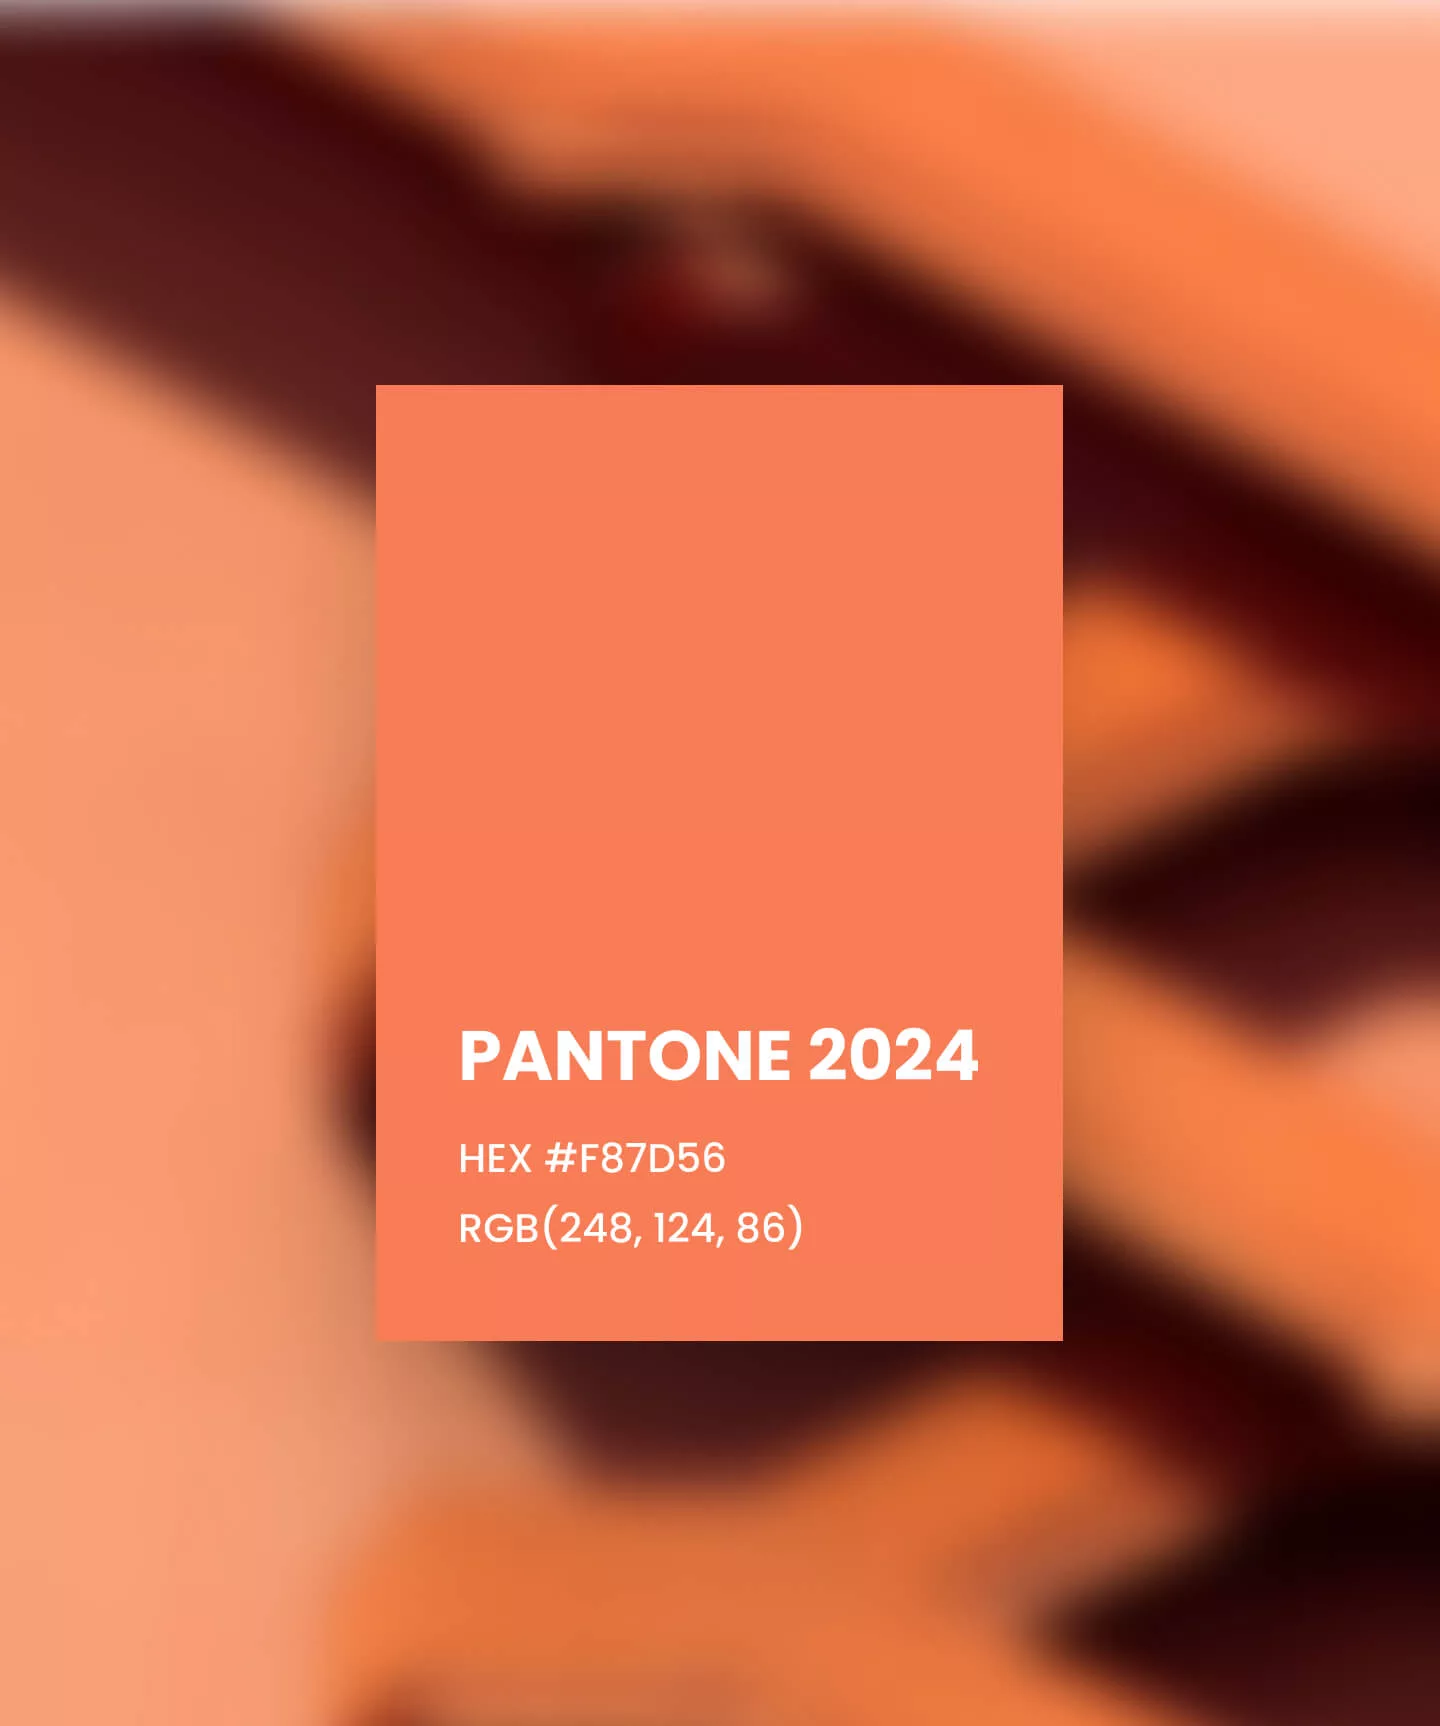 The Pantone Color for 2024